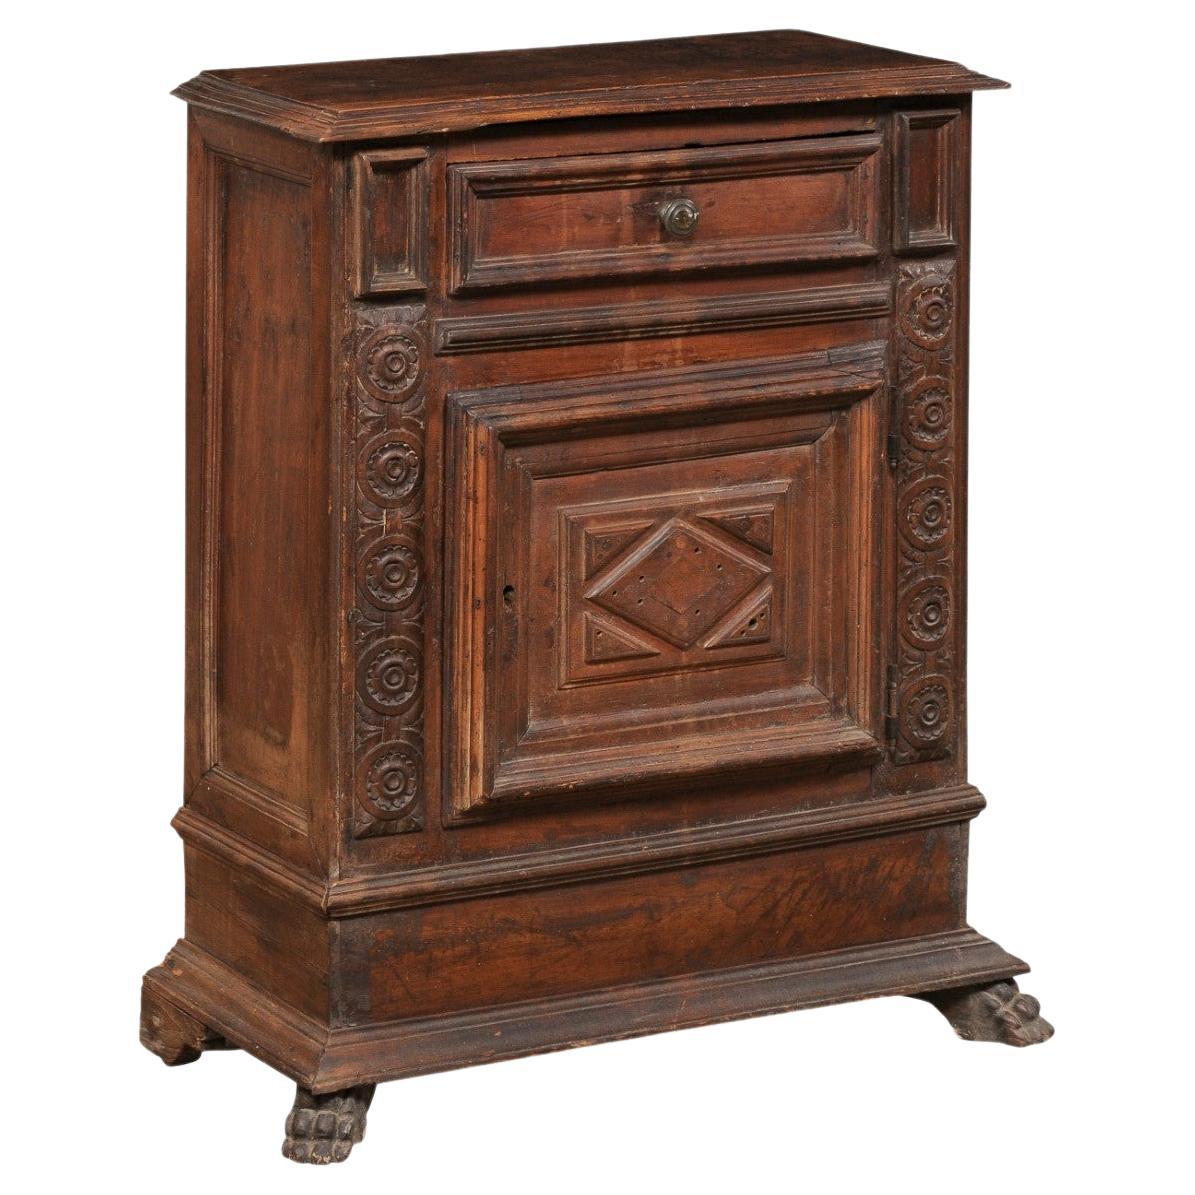 Italian Small-Sized Carved Walnut Cabinet on Paw Feet, Turn of 17th & 18th C. For Sale